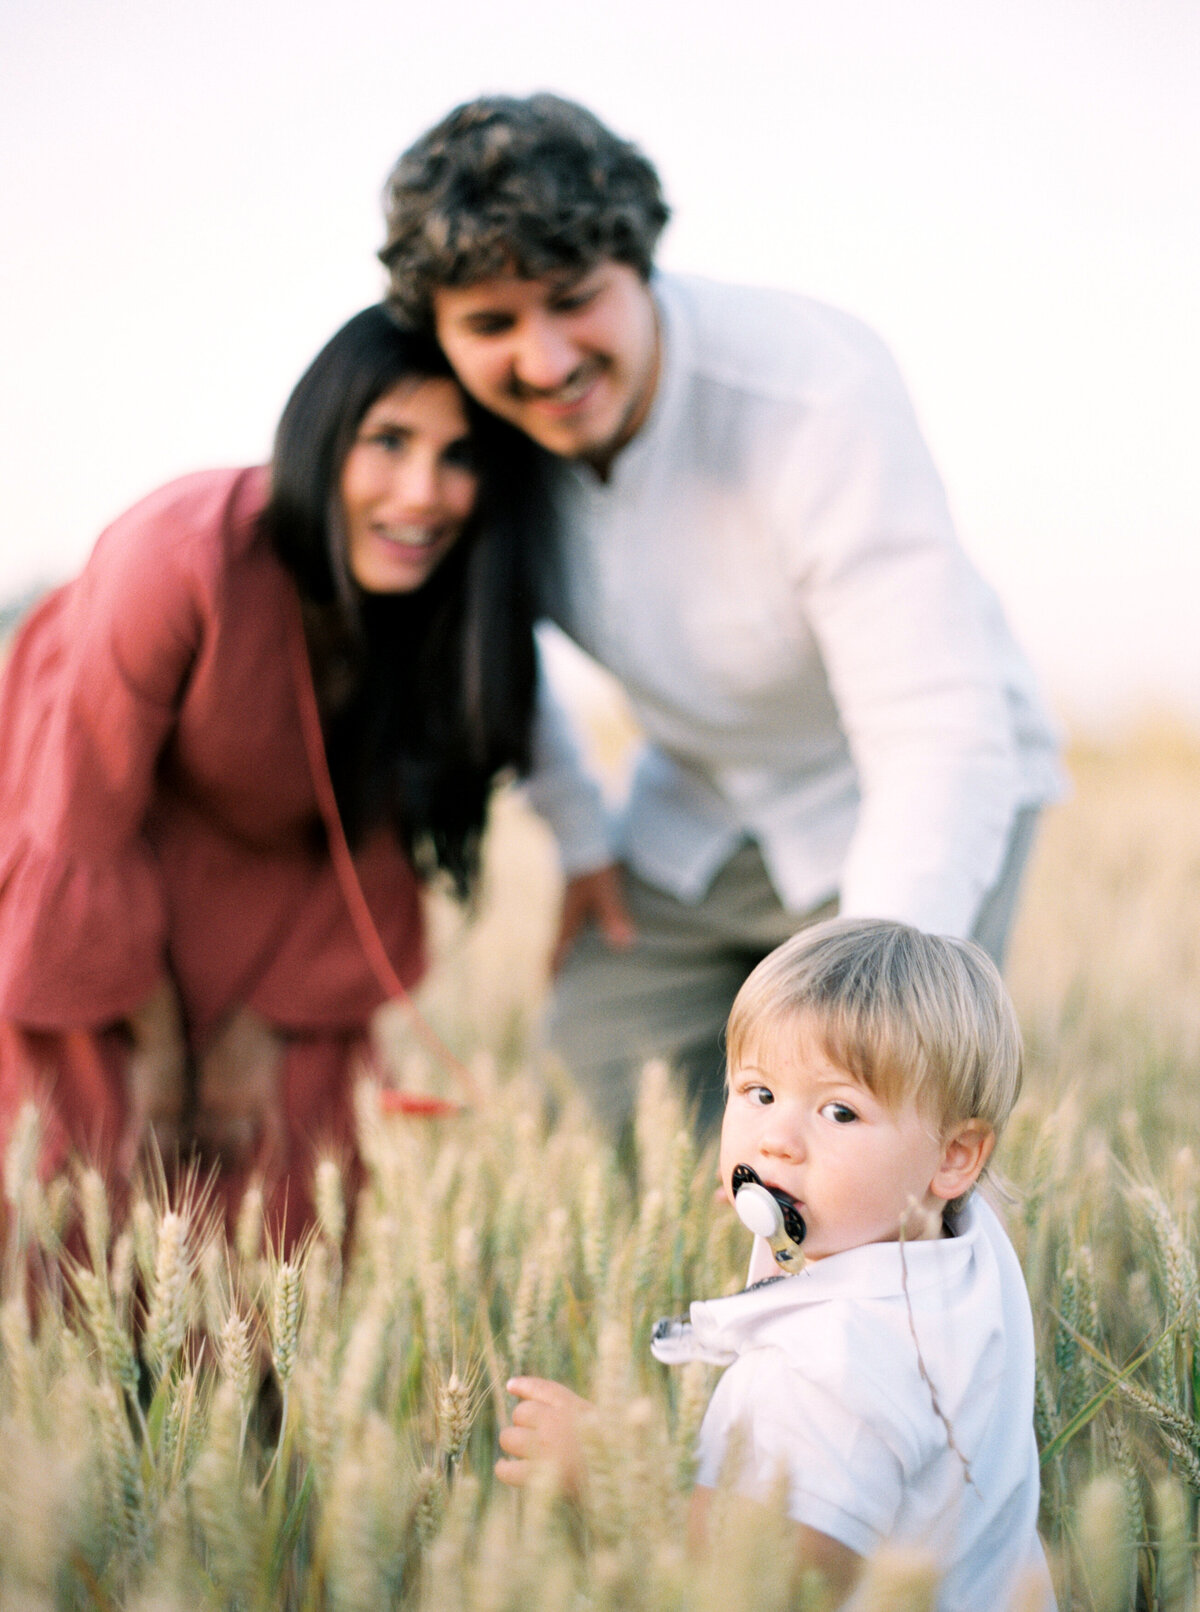 Family photography session outdoors in Cesena, Emilia-Romagna, Italy - 22